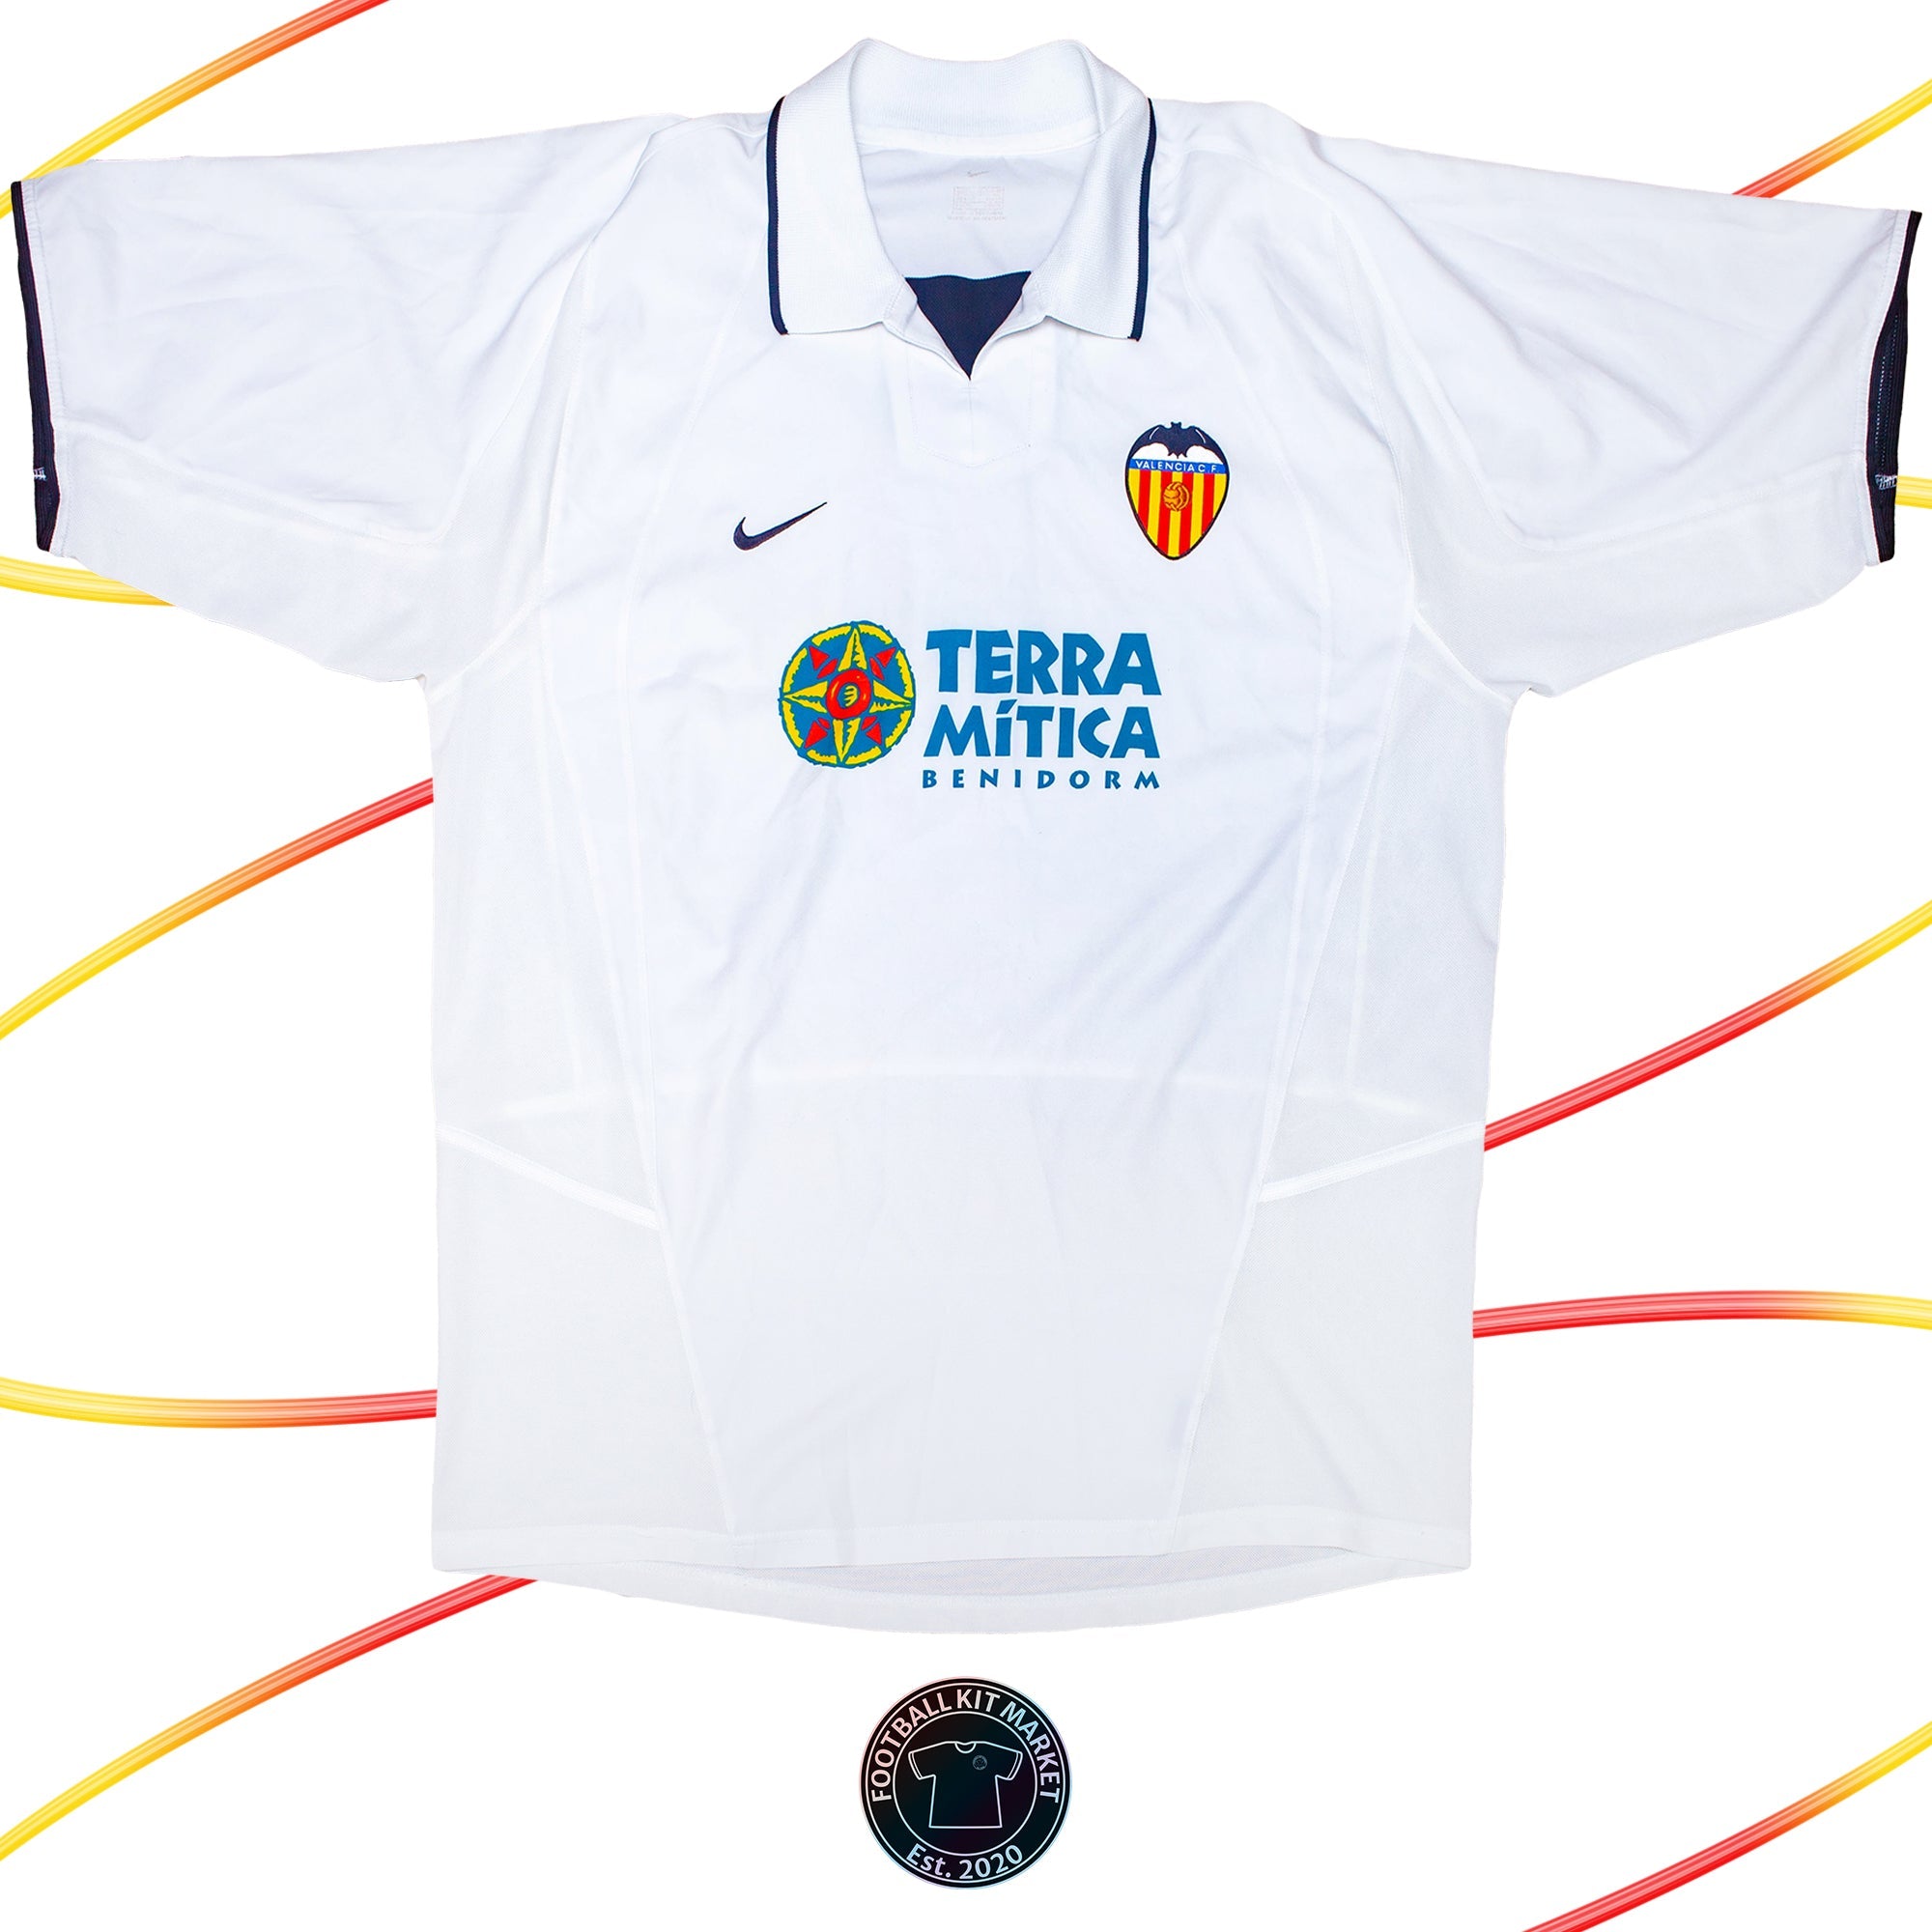 Genuine VALENCIA Home (2002-2003) - NIKE (XL) - Product Image from Football Kit Market